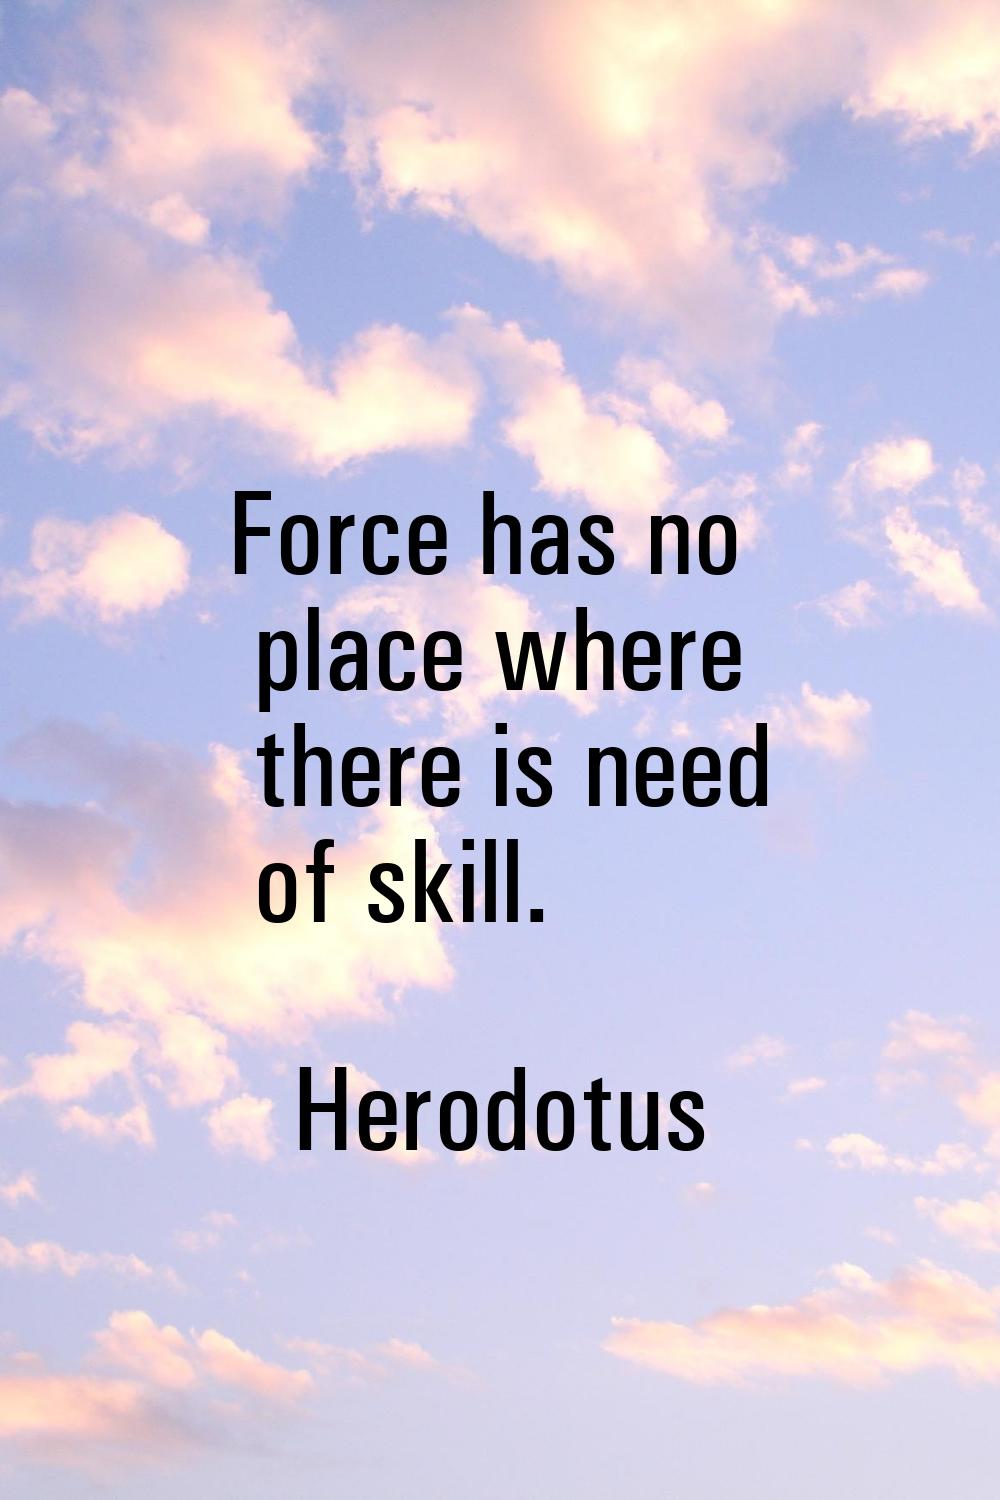 Force has no place where there is need of skill.